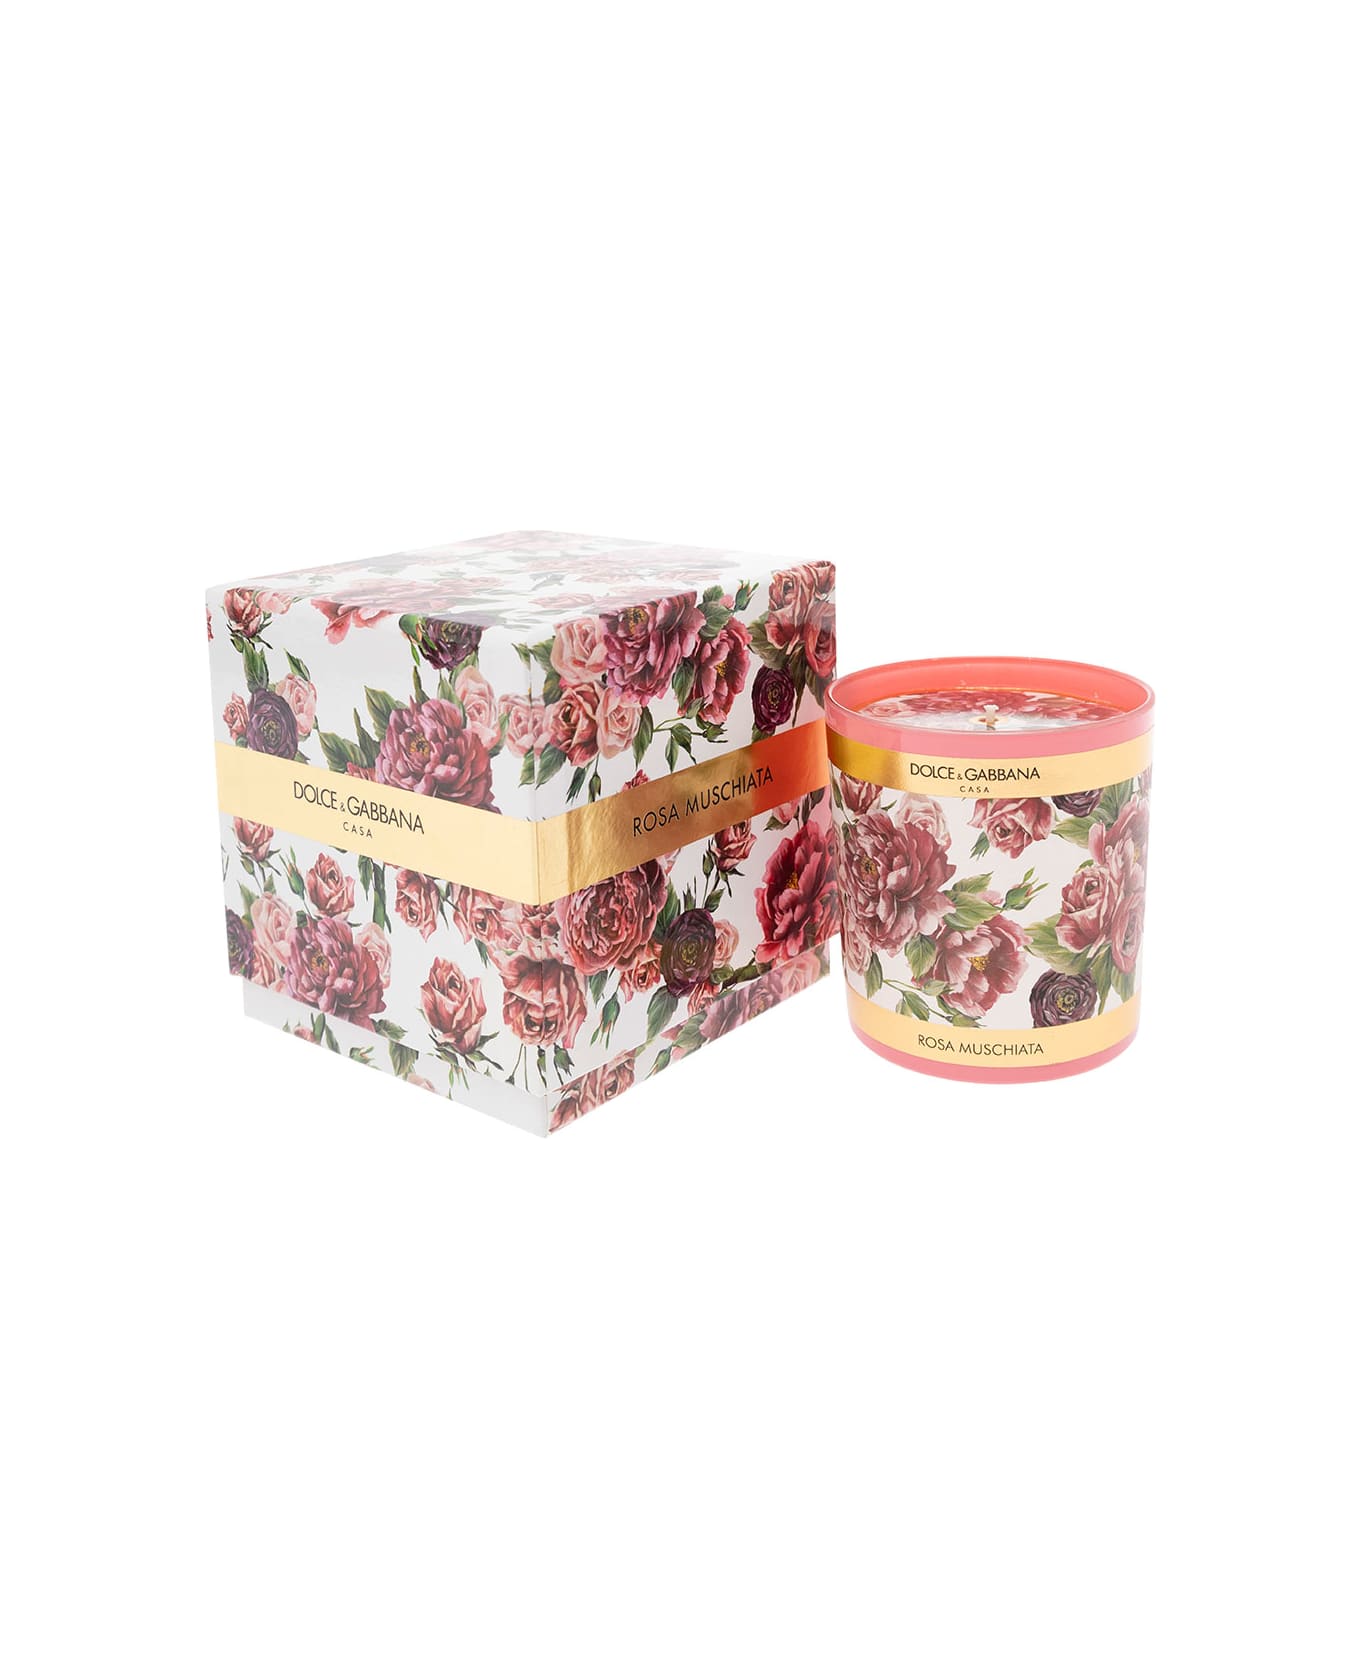 Dolce & Gabbana Musk Rose Scented Candle - Pink